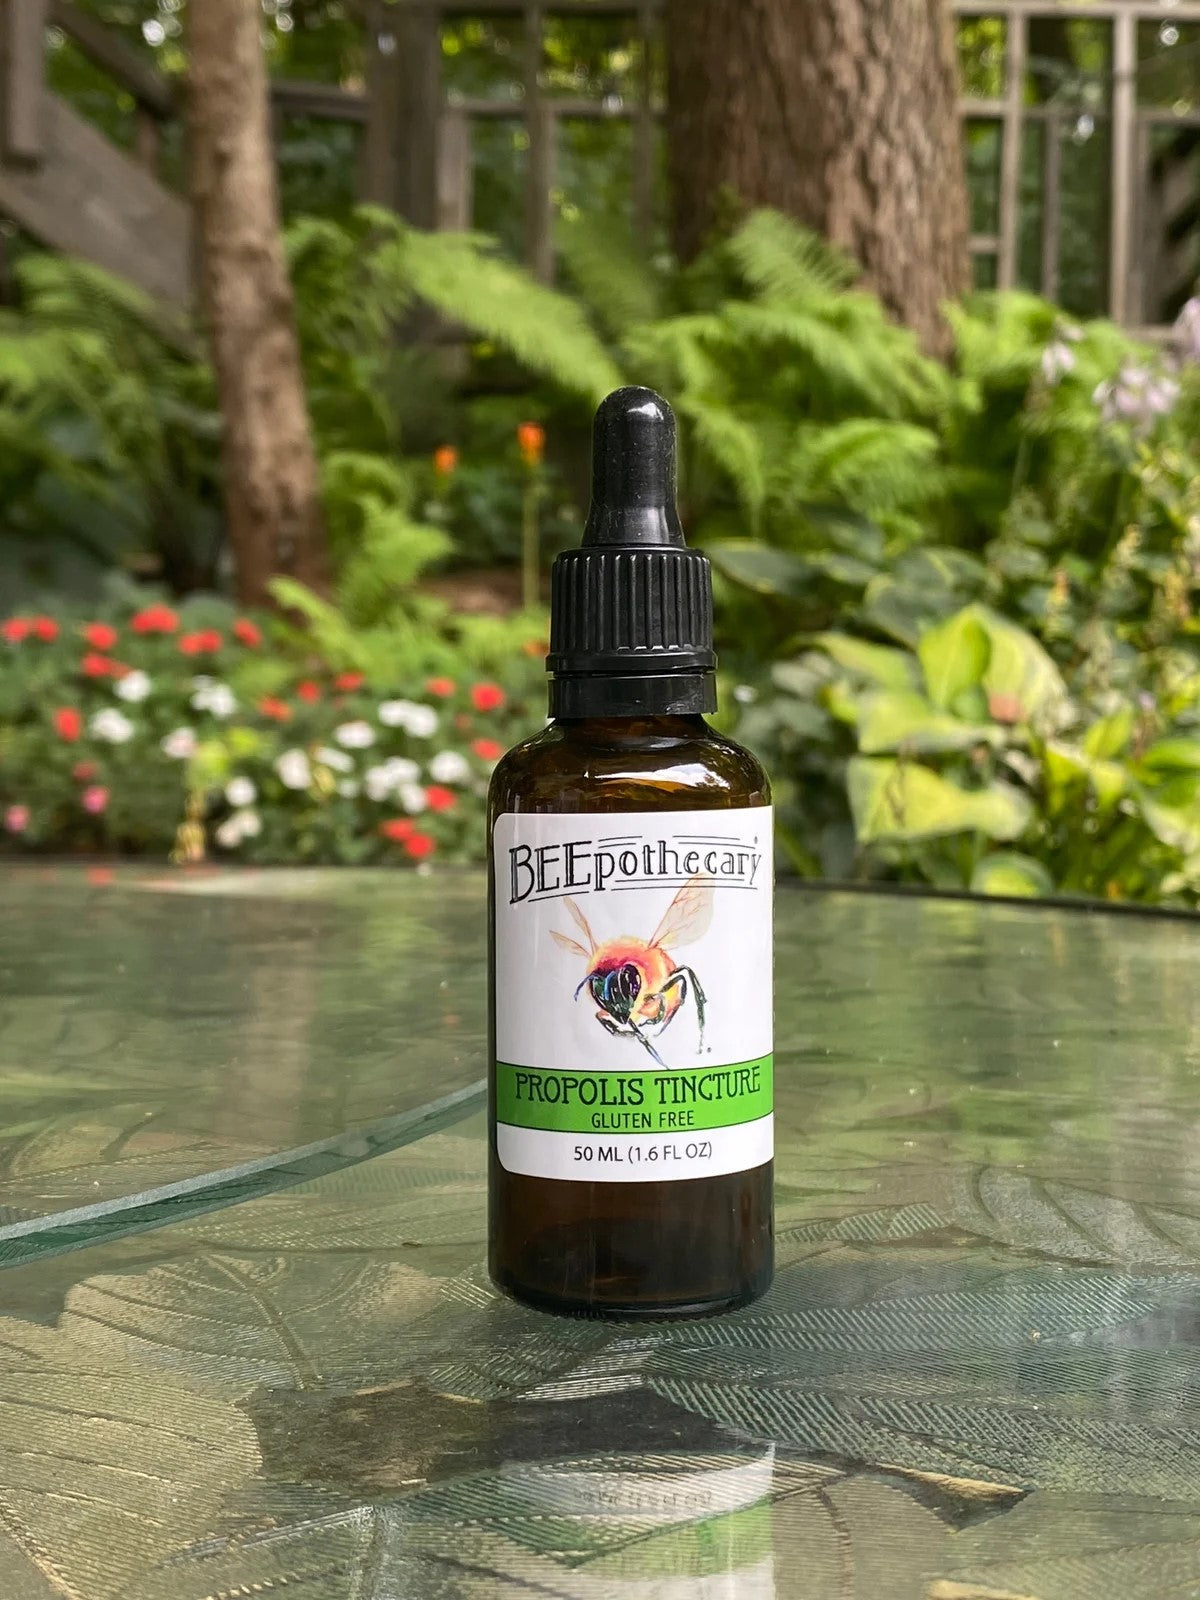 BEEpothecary Propolis Tincture Gluten Free in 50 ml brown bottle with white label and dropper.